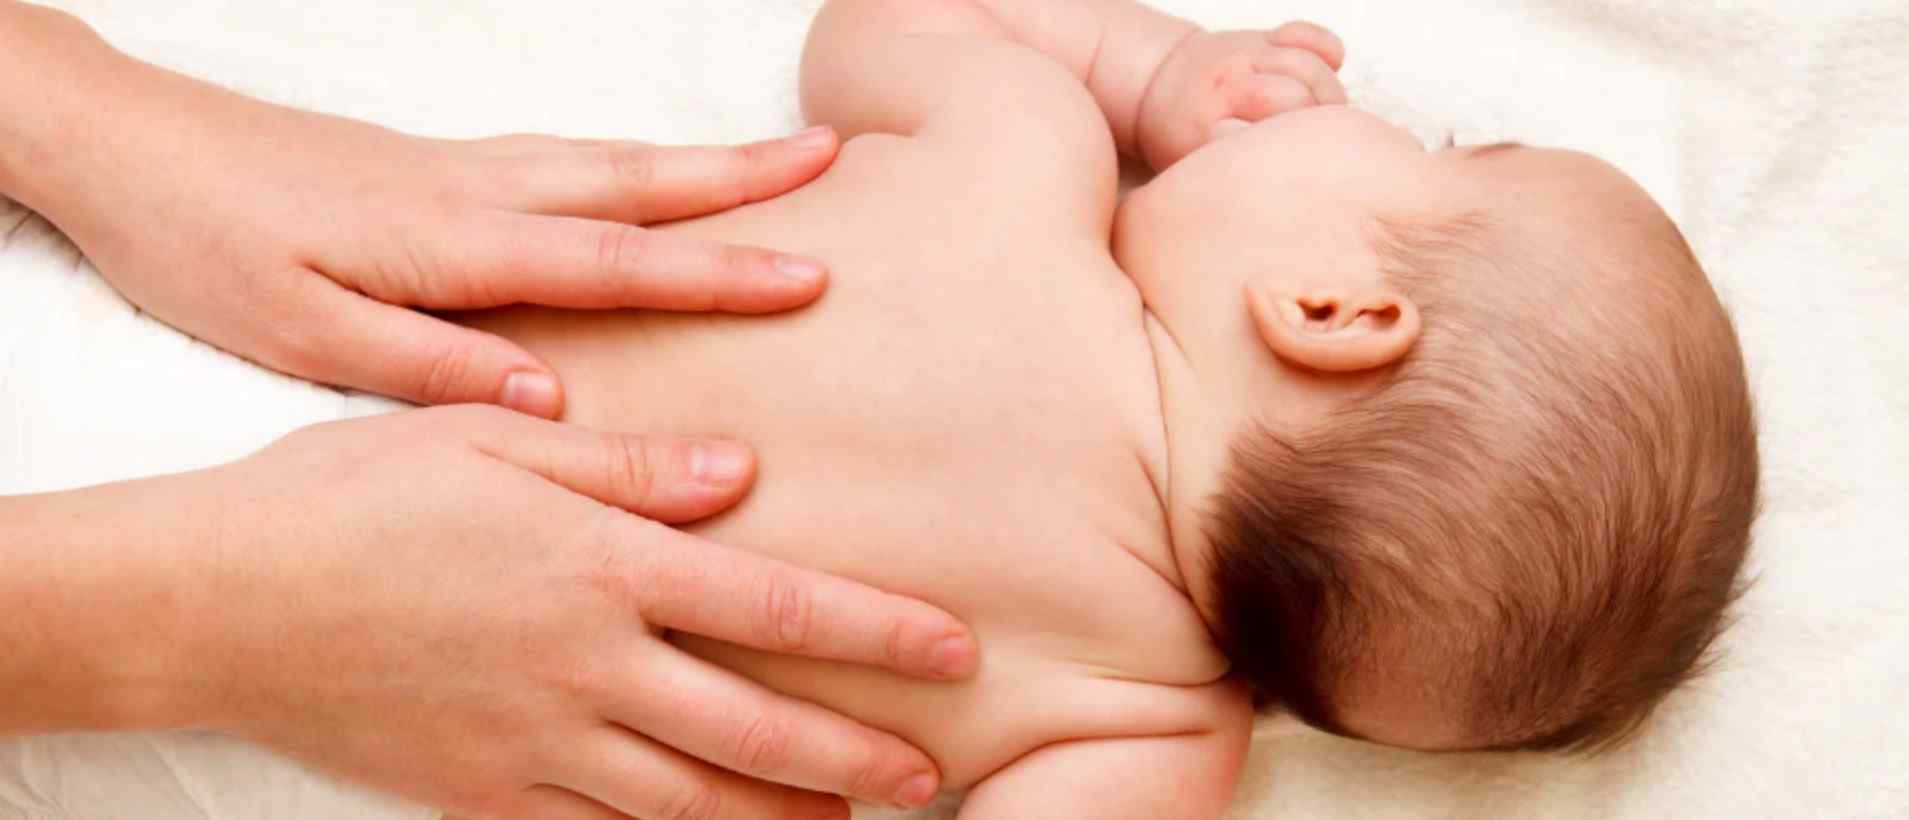 The oil is beneficial for baby massage.